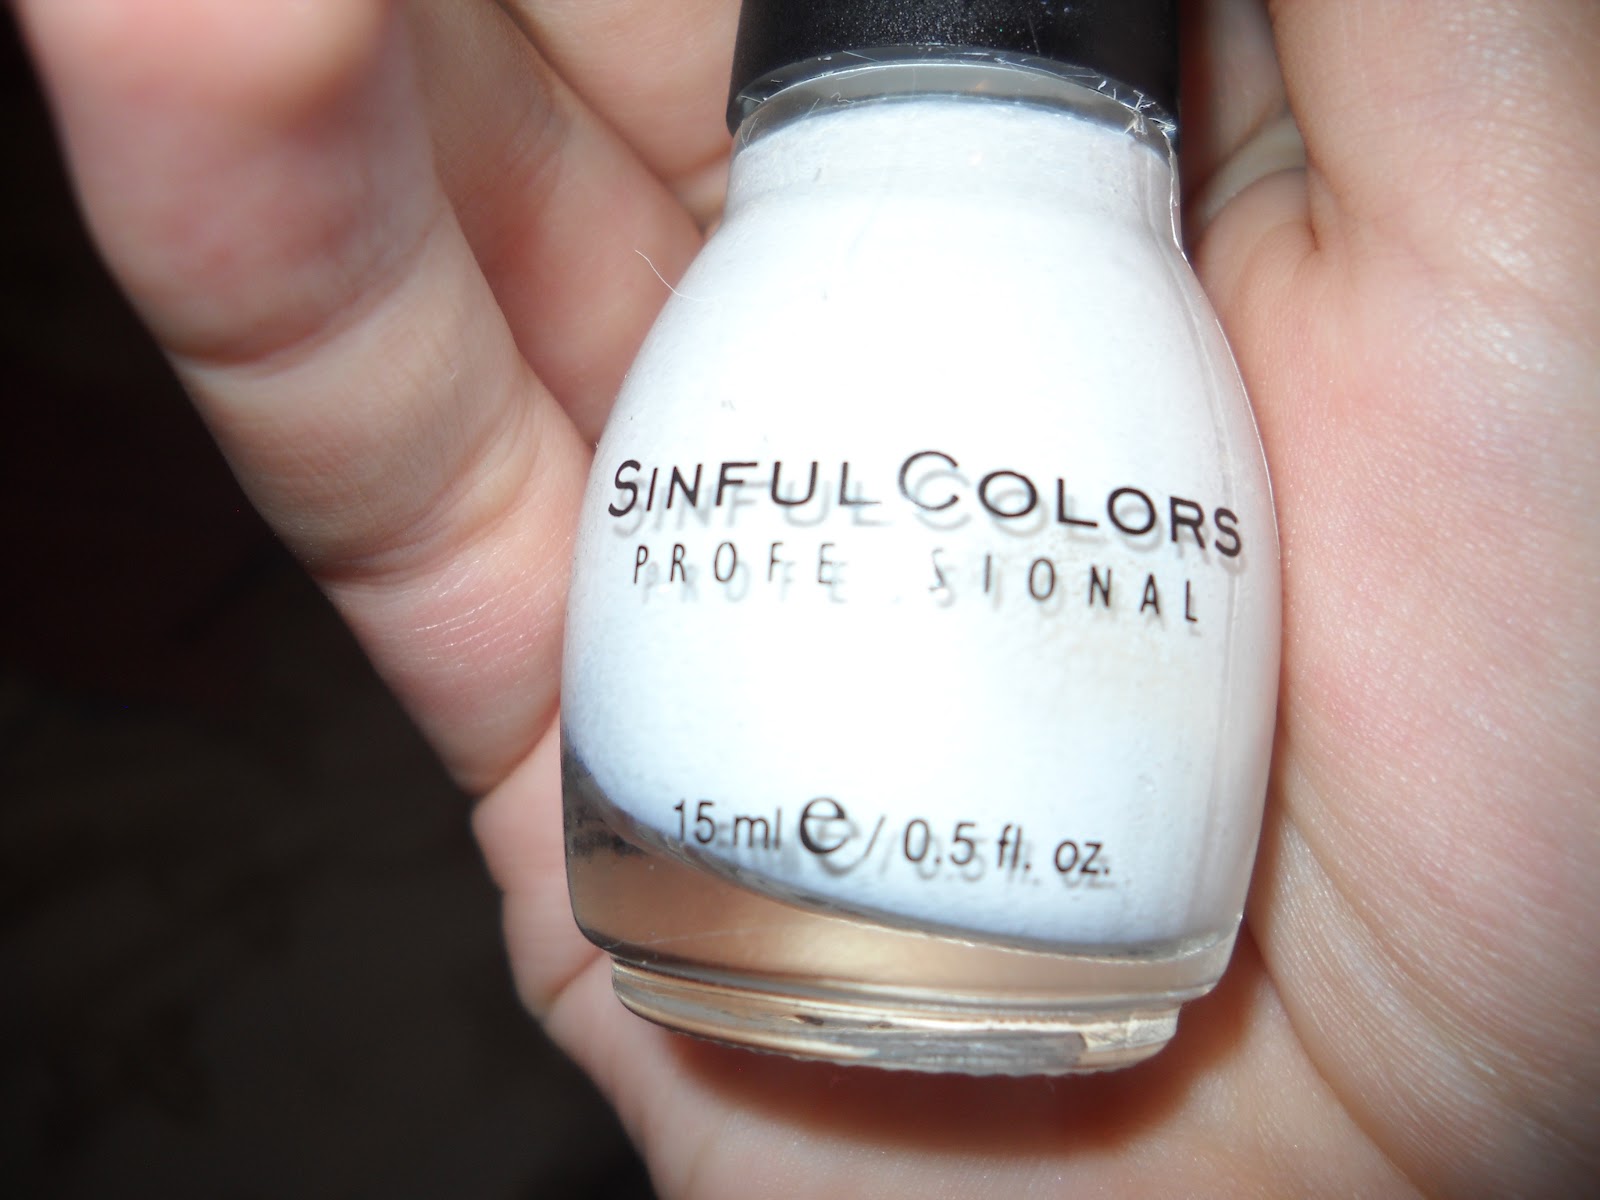 Sinful Colors Professional Nail Polish, Snow Me White - wide 8